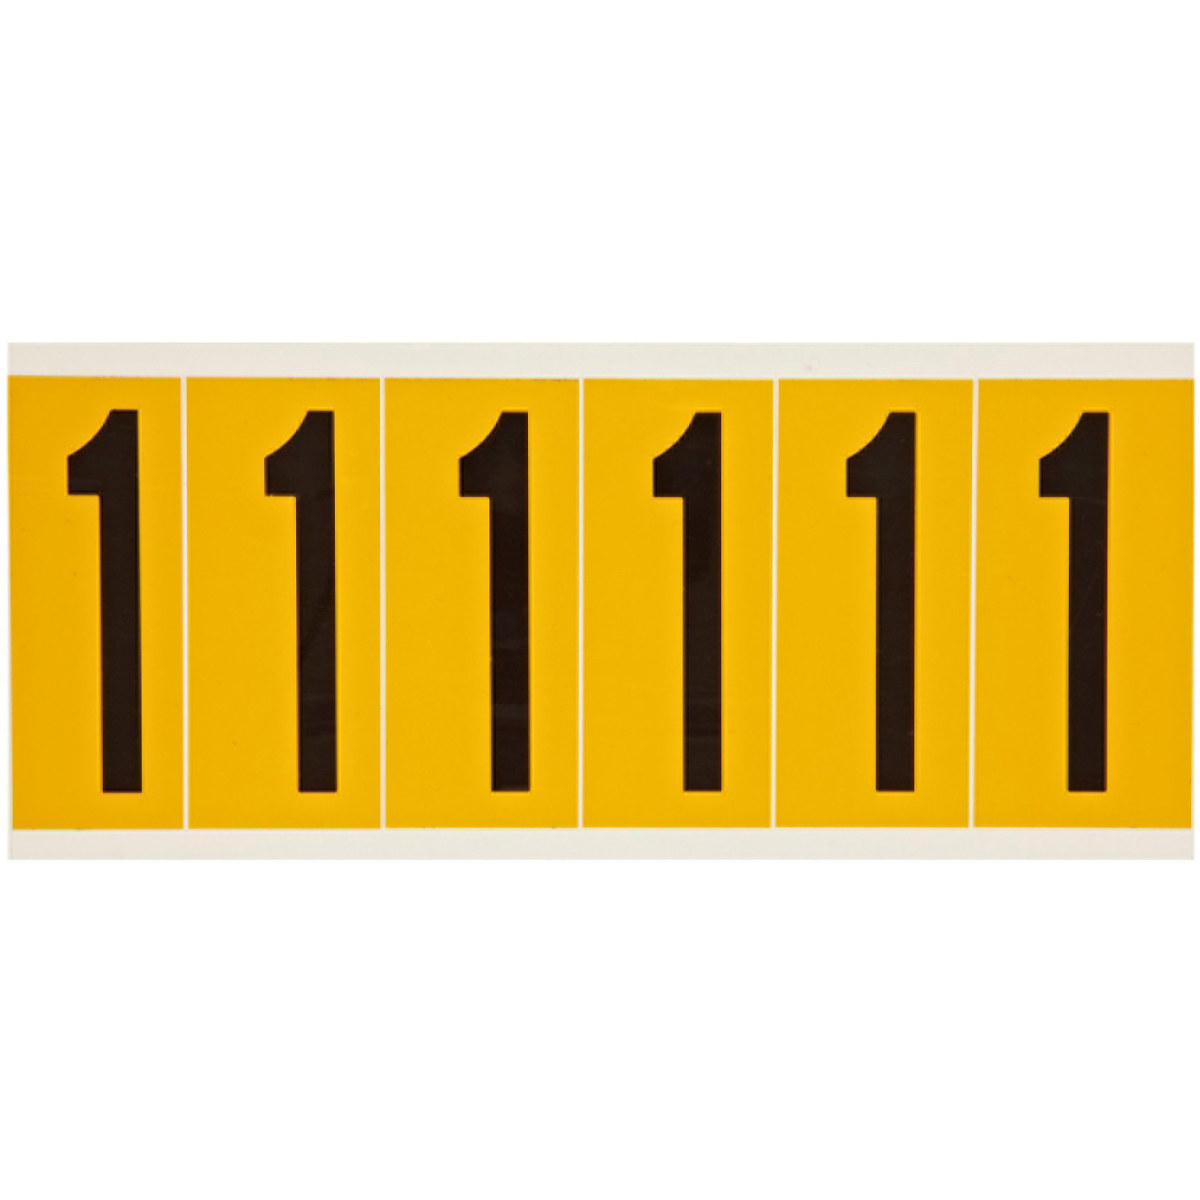 6 Labels Per Card Brady 1550-1 3-1/2 Height B-946 High Performance Vinyl Black On Yellow Color 15 Series Indoor Or Outdoor Number Labels Legend 1 1-1/2 Width 